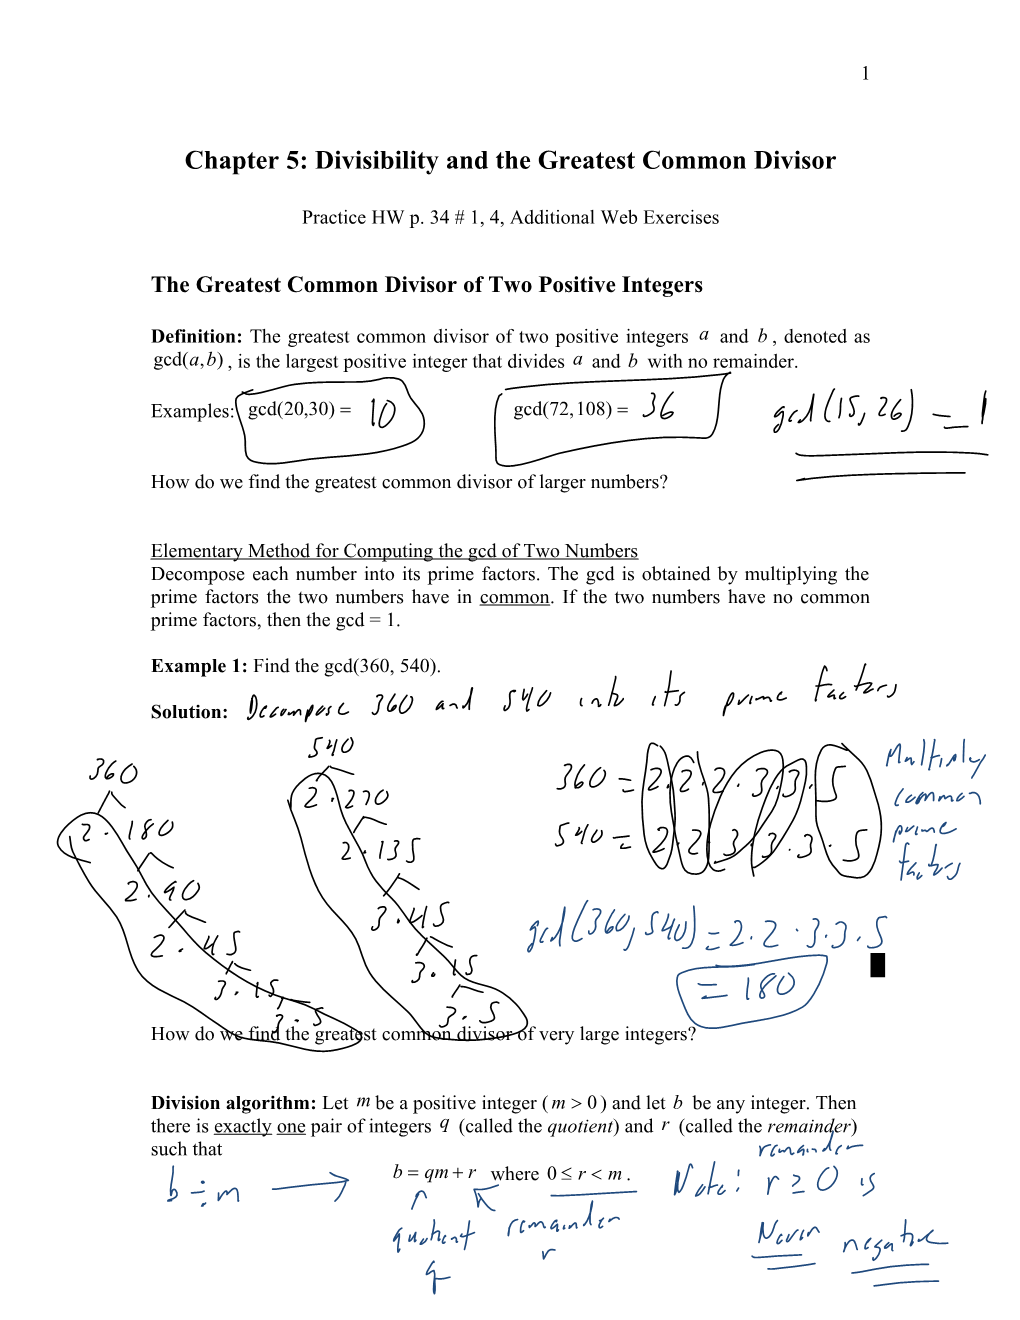 Chapter 5: Divisibility and the Greatest Common Divisor